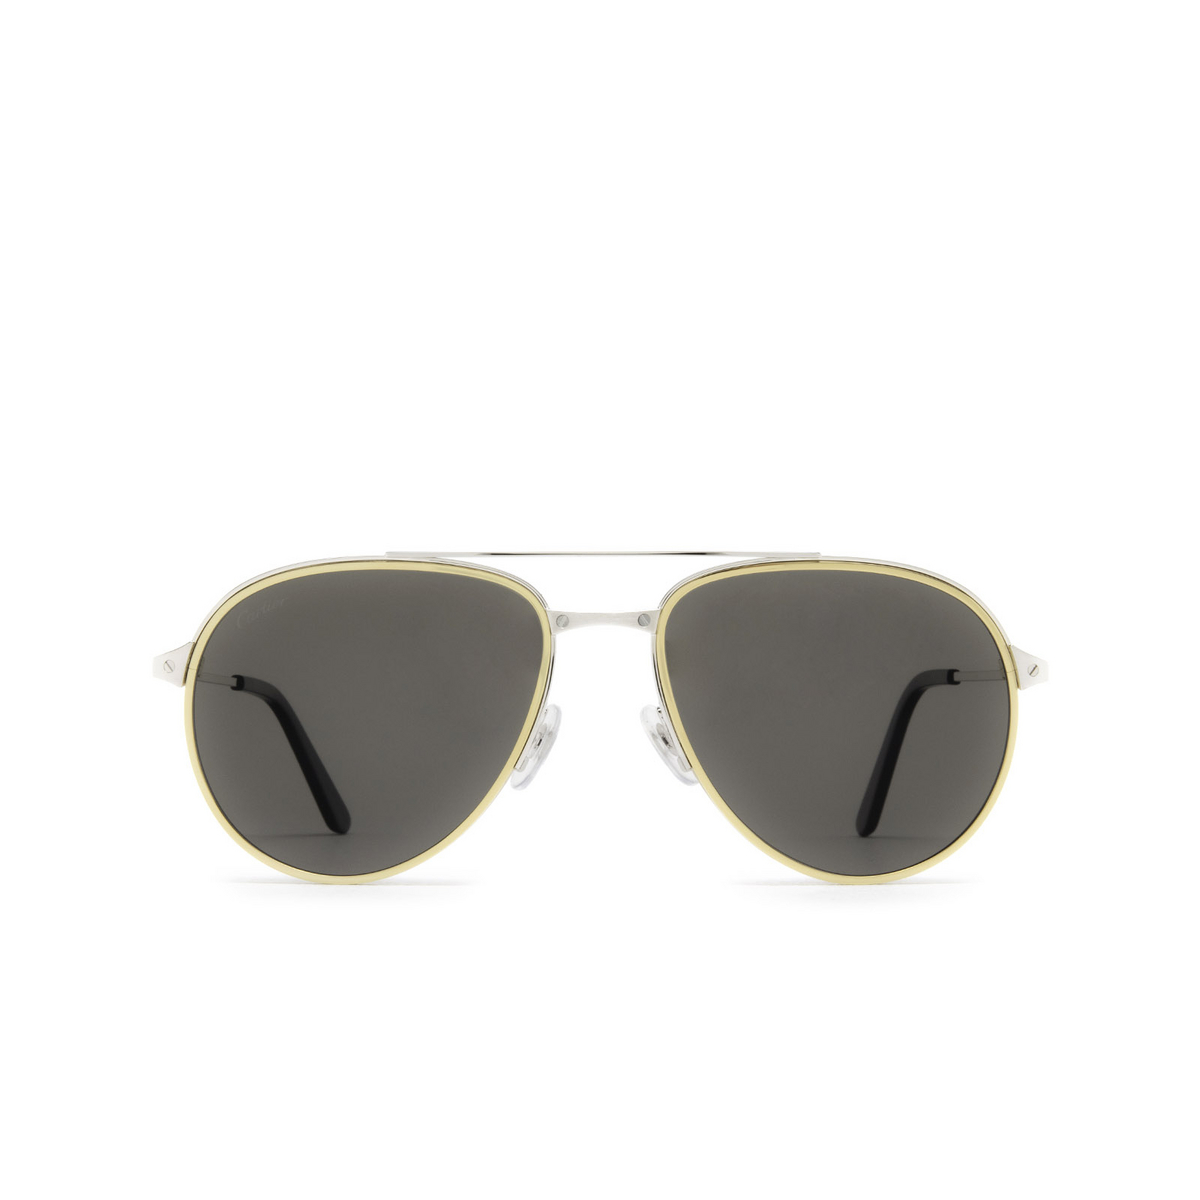 Cartier® Aviator Sunglasses: CT0325S color Silver 005 - front view.